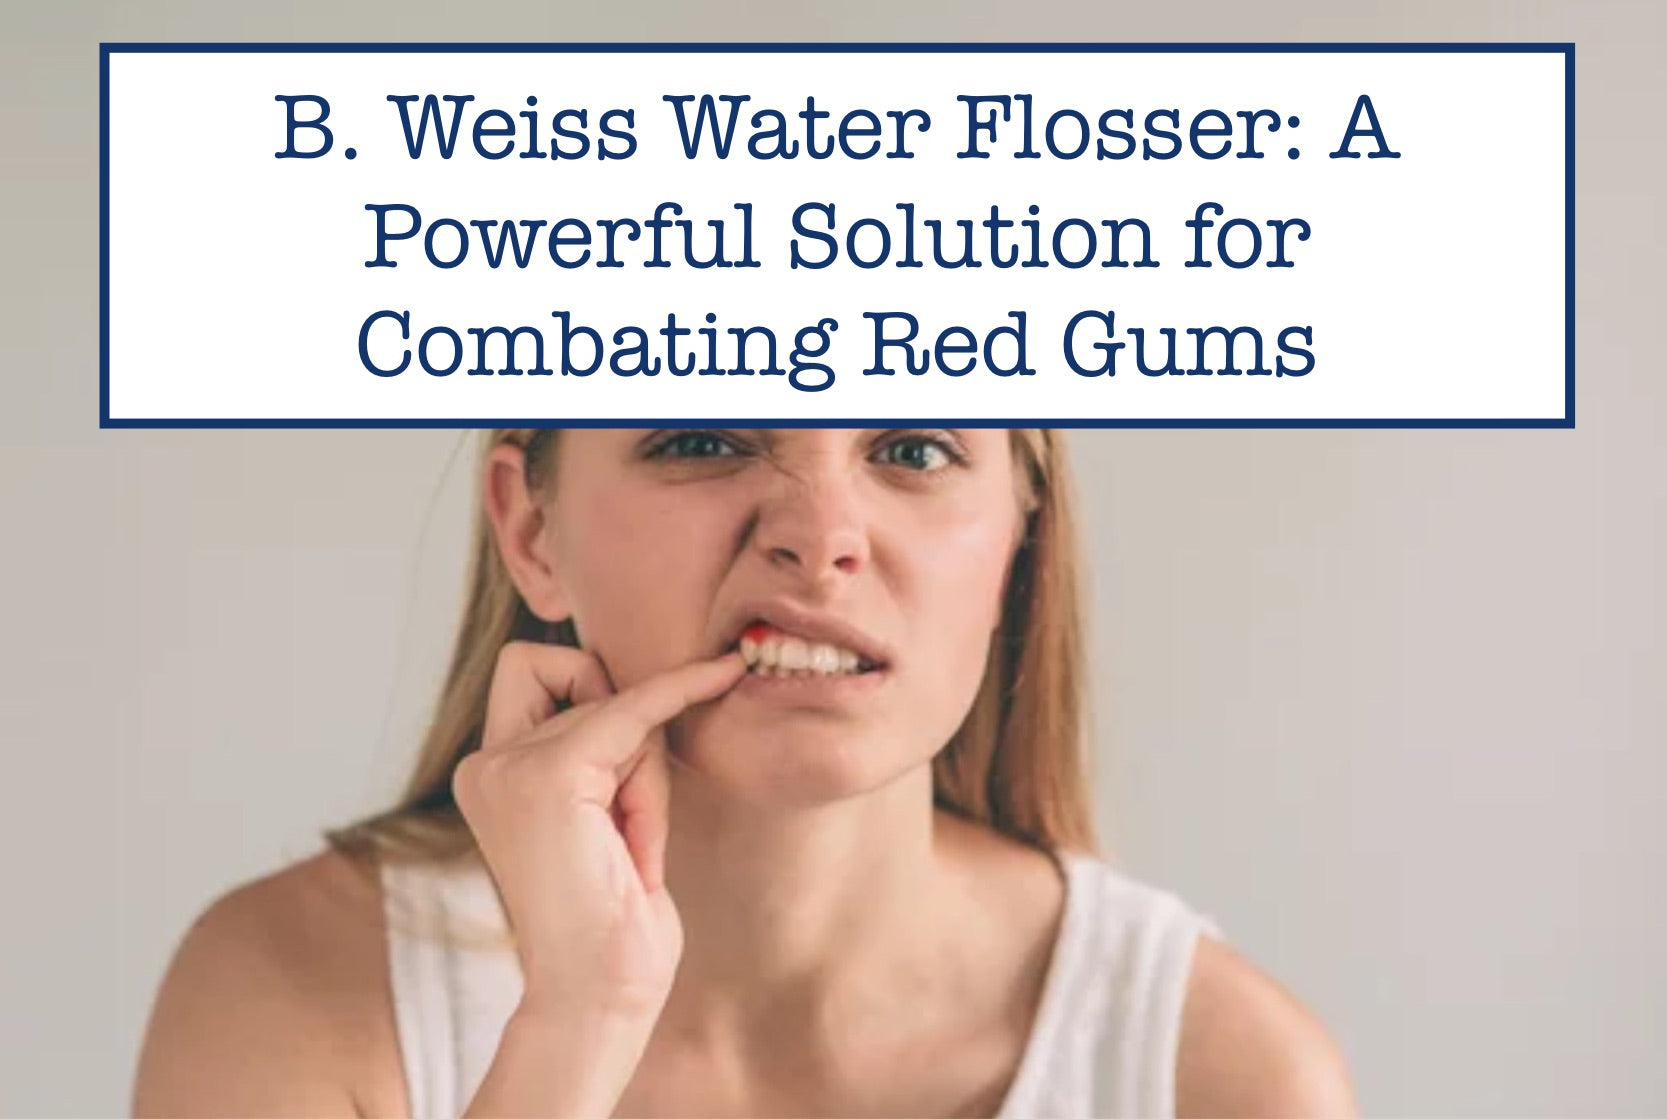 B. Weiss Water Flosser: A Powerful Solution for Combating Red Gums